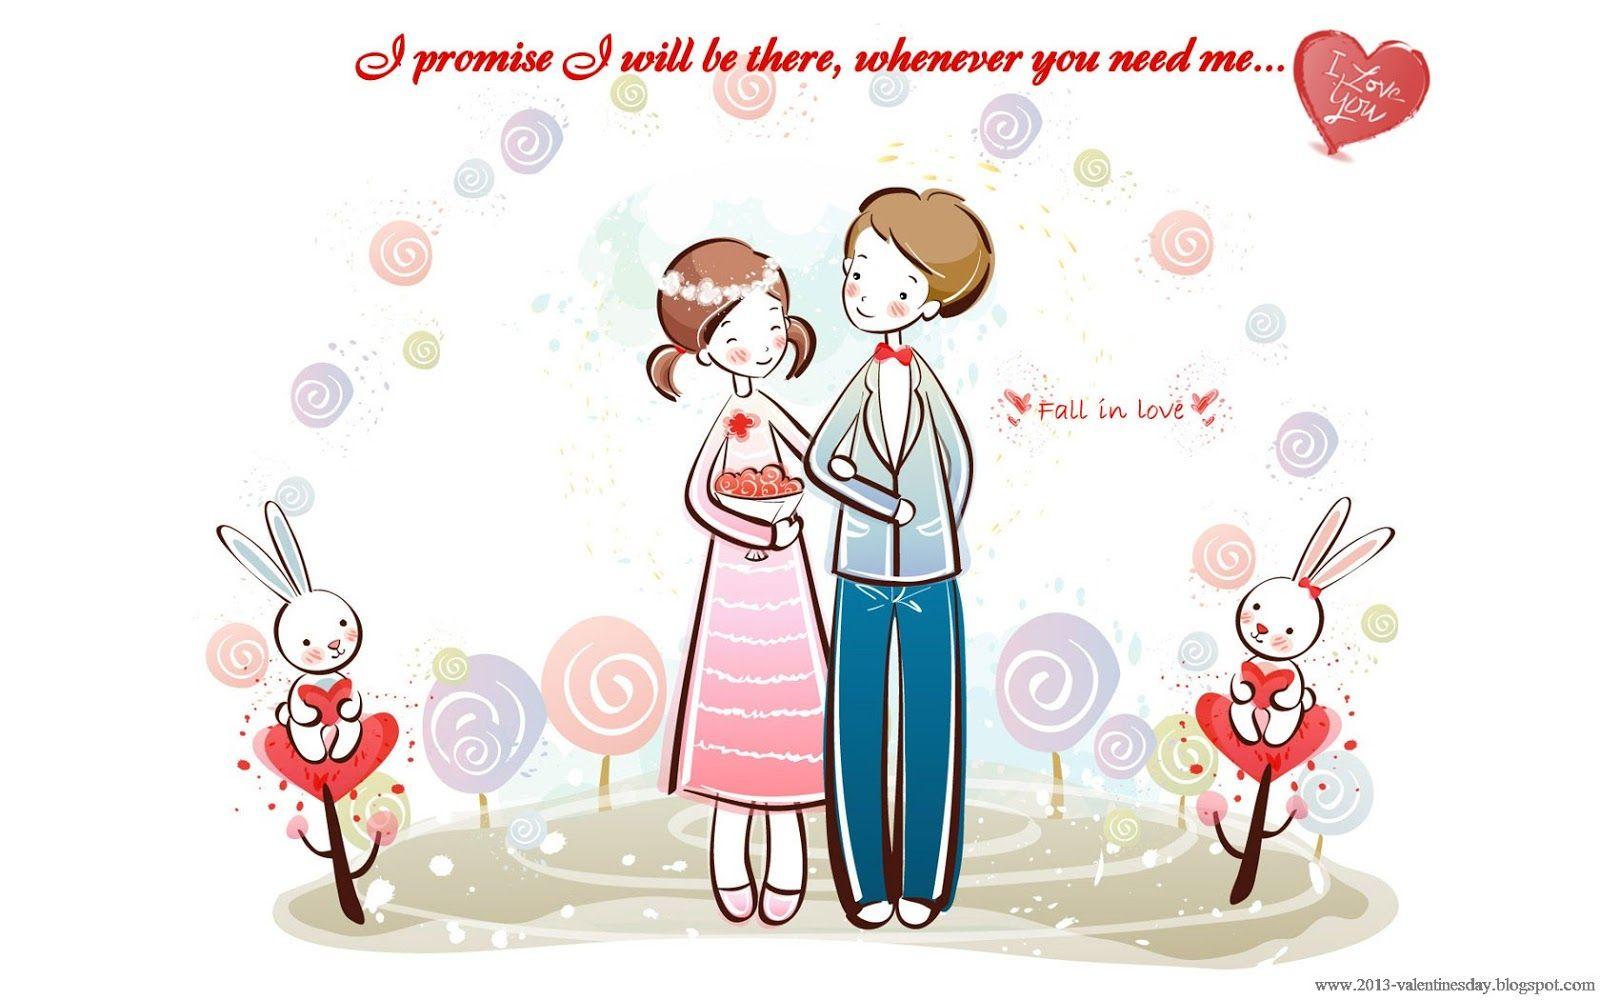 images of love couples animated with quotes